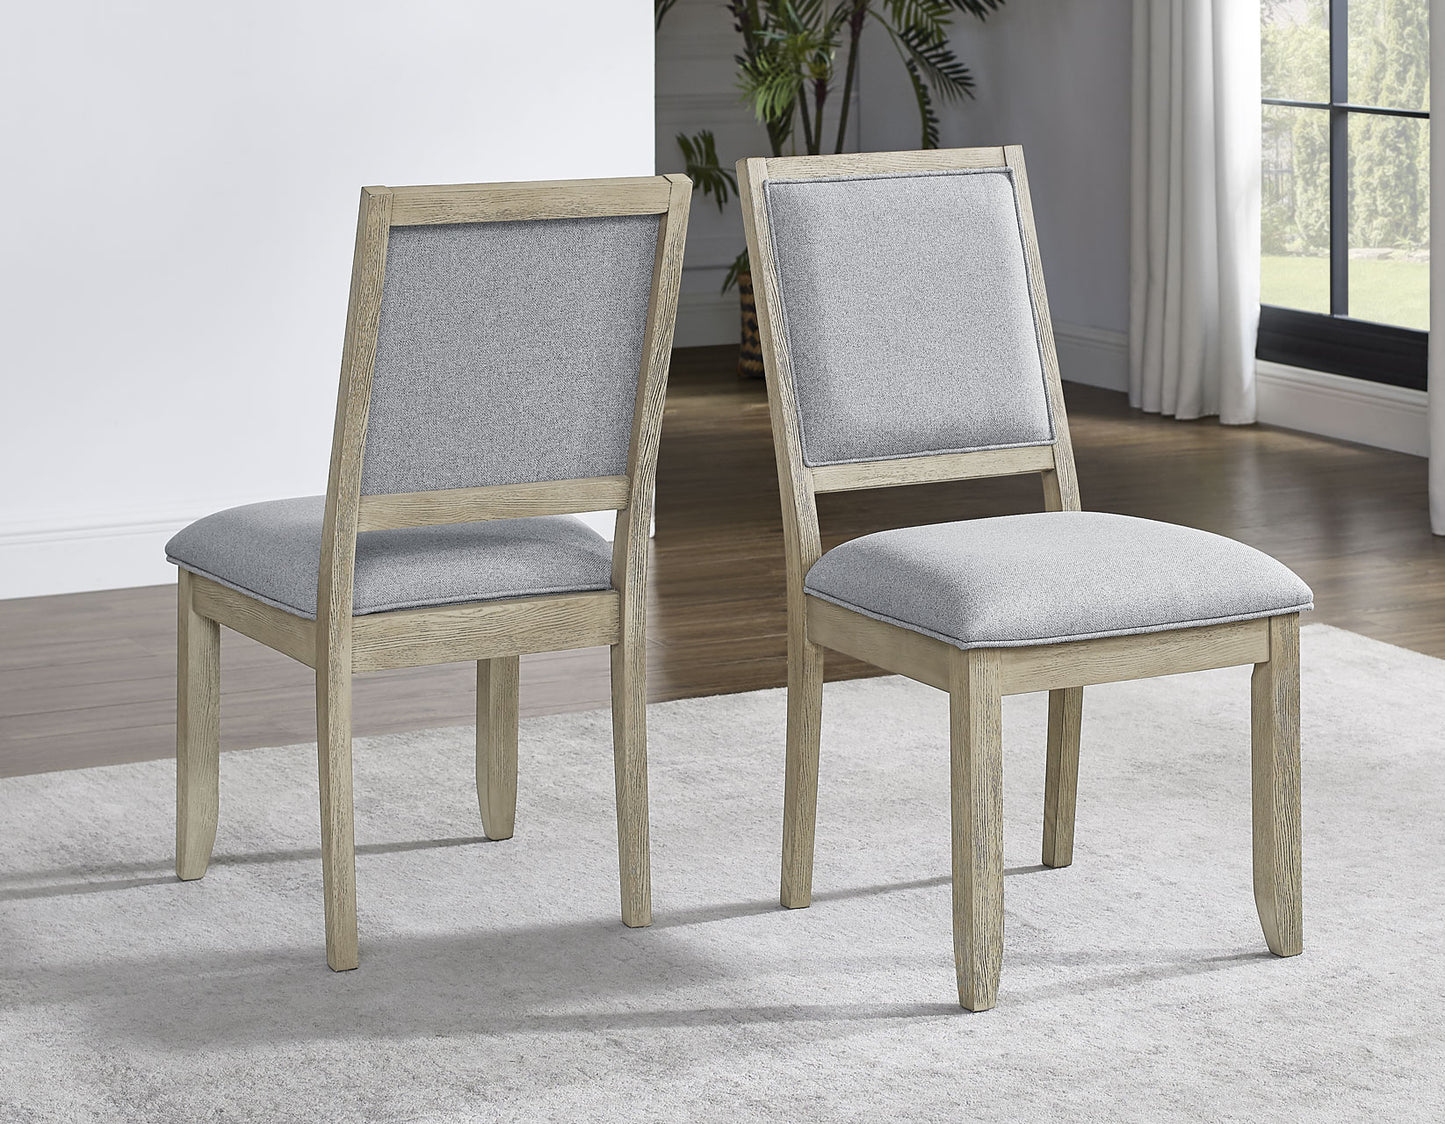 Carena 5-Piece White Marble Dining Set
(Table & 4 Side Chairs)